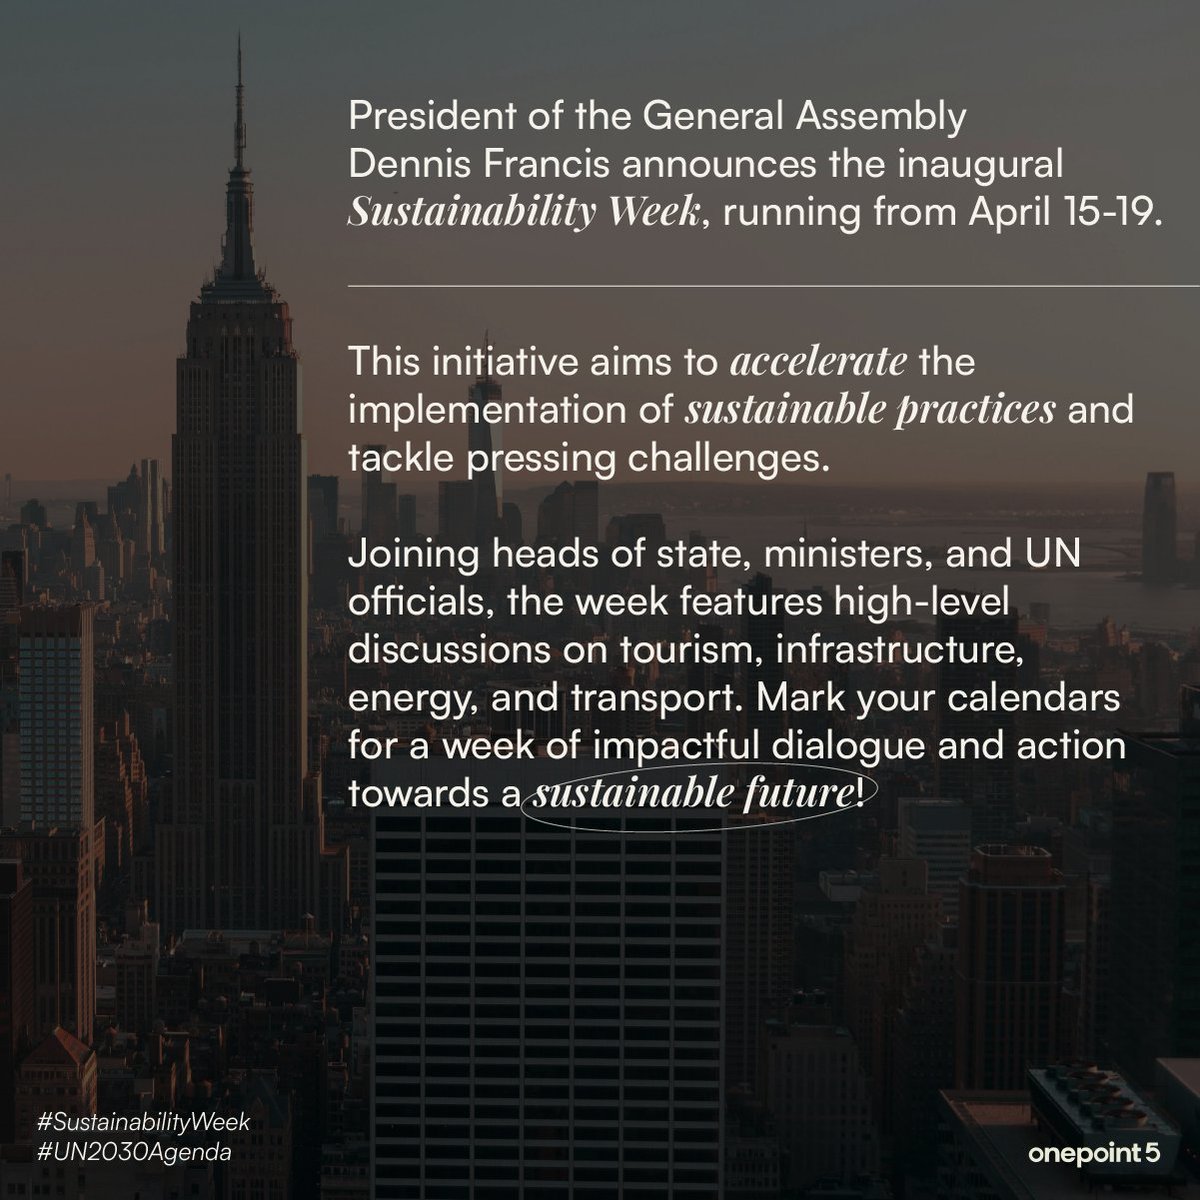 The President of the @UN General Assembly Dennis Francis has announced UN body’s inaugural ’Sustainability Week' with thematic debates on debt sustainability and socioeconomic equality, tourism, sustainable transport and more. #SustainabilityWeek